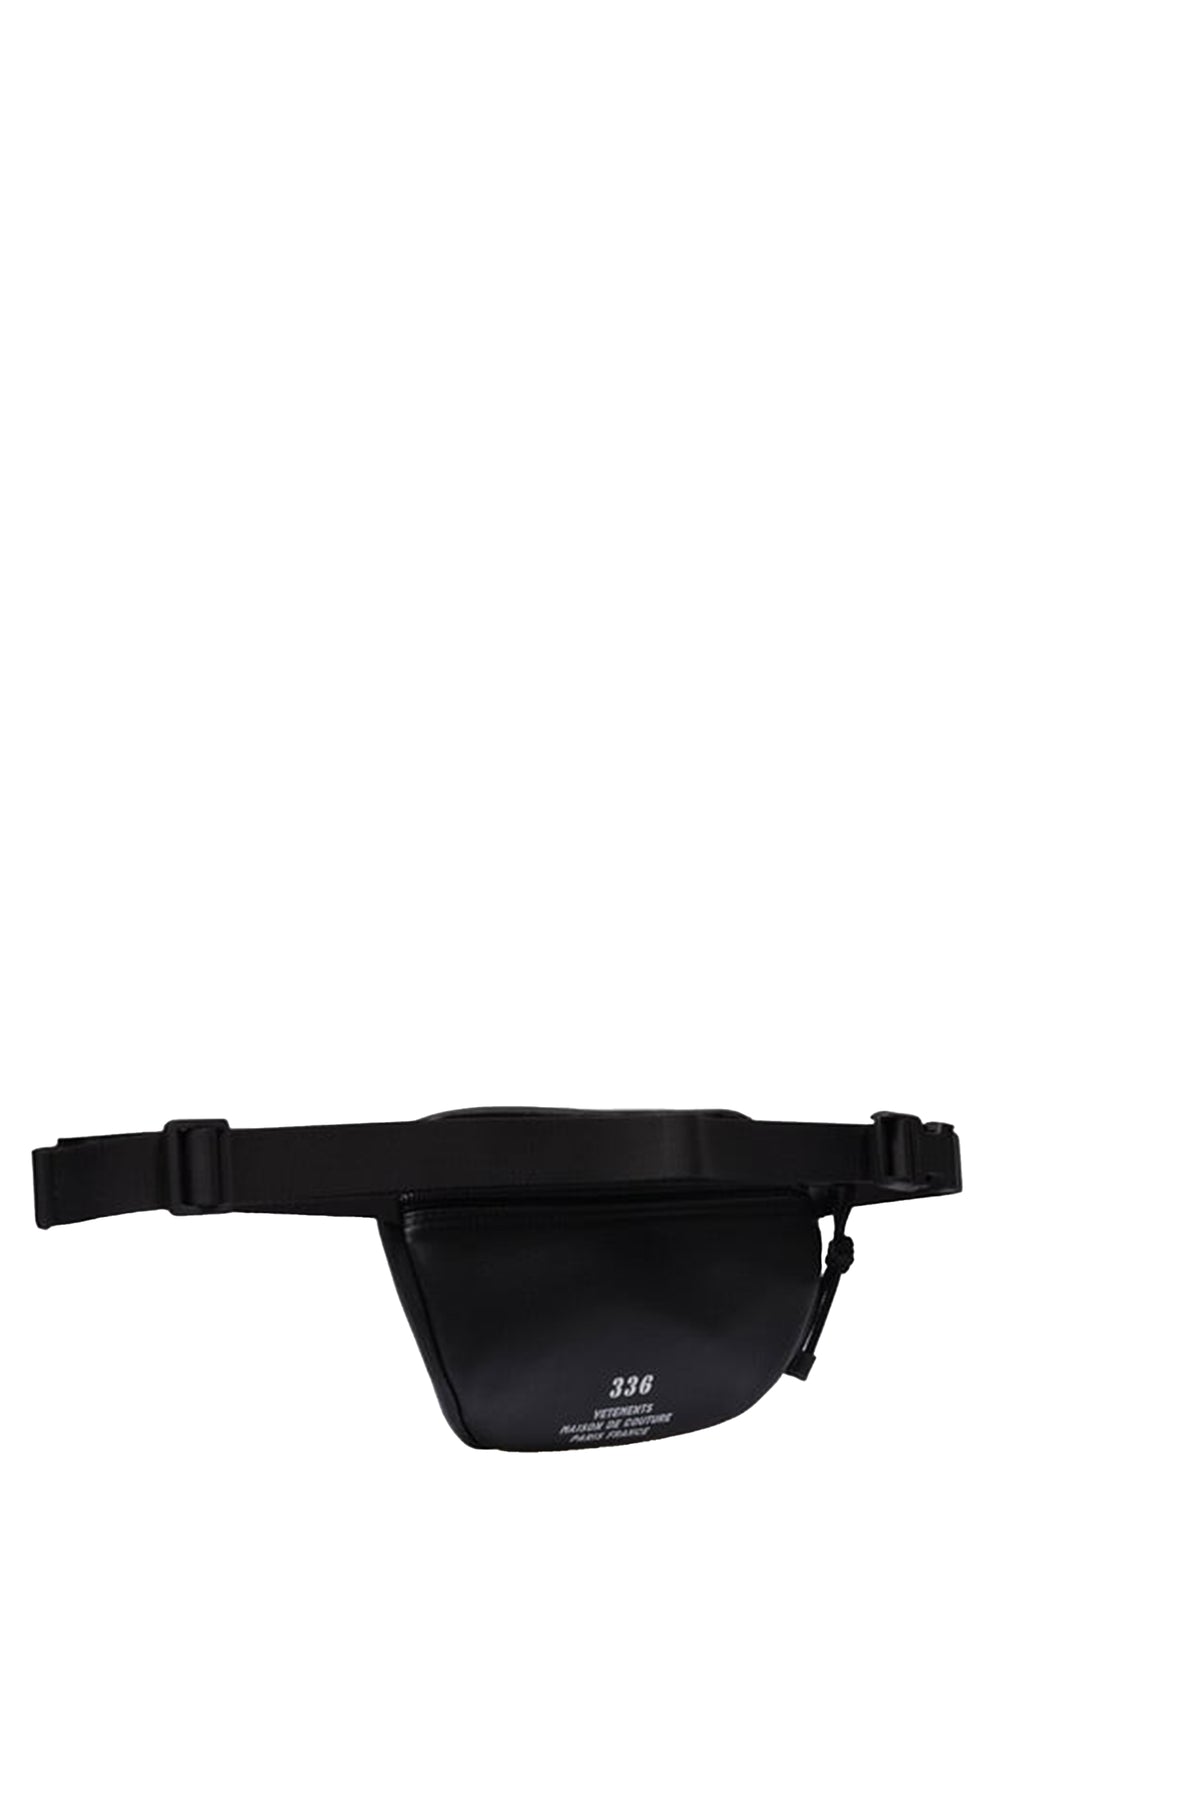 HAUTE COUTURE LEATHER FANNY PACK / BLK